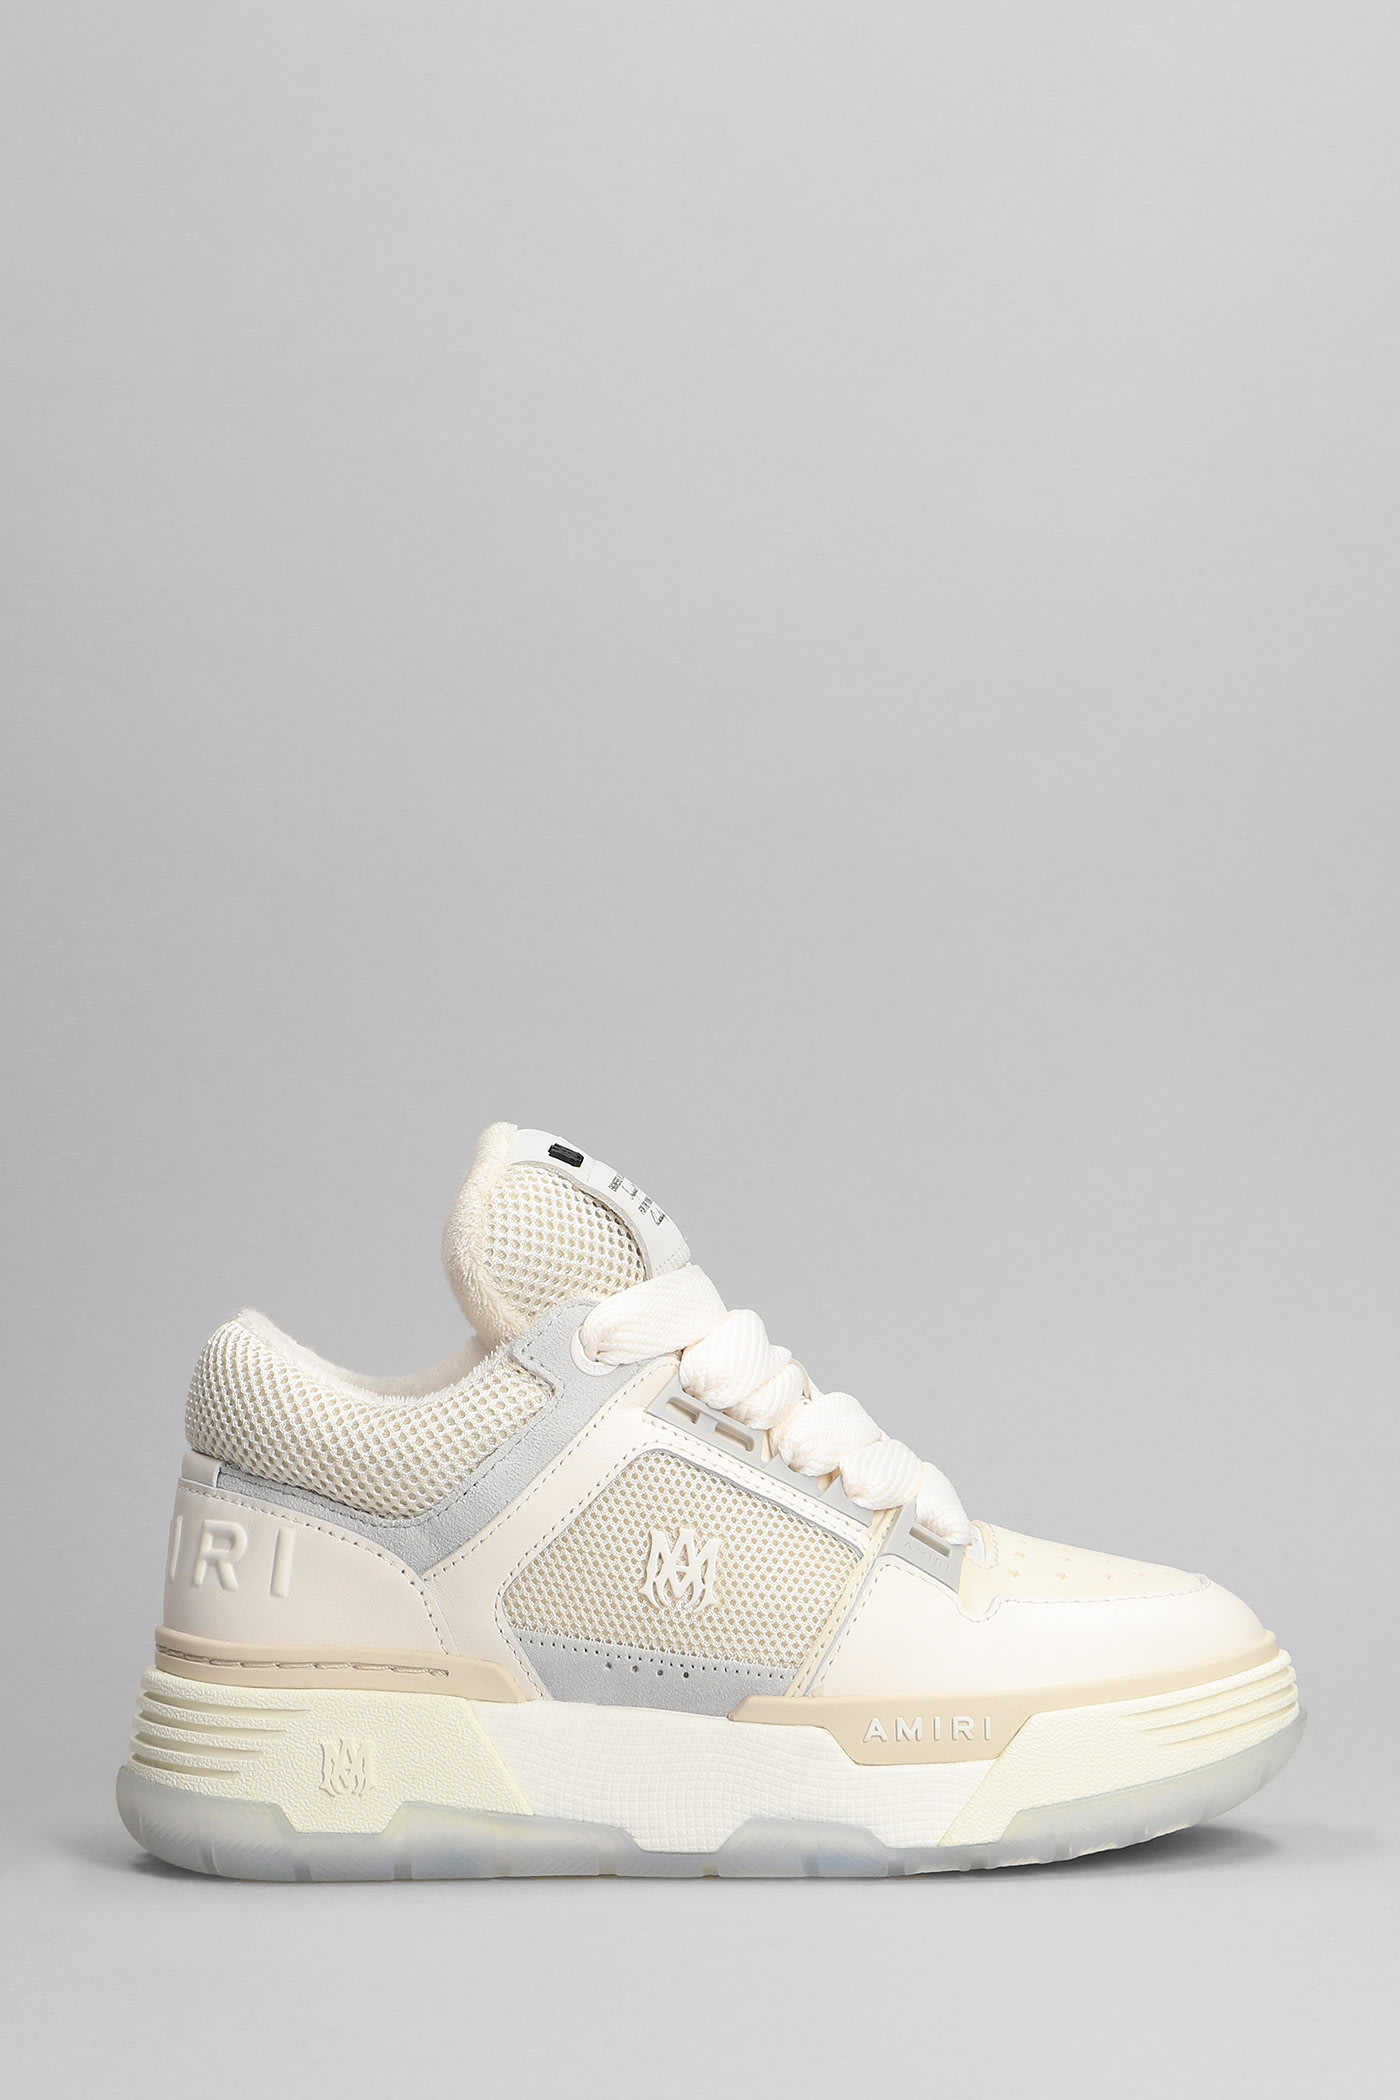 AMIRI SNEAKERS IN WHITE LEATHER